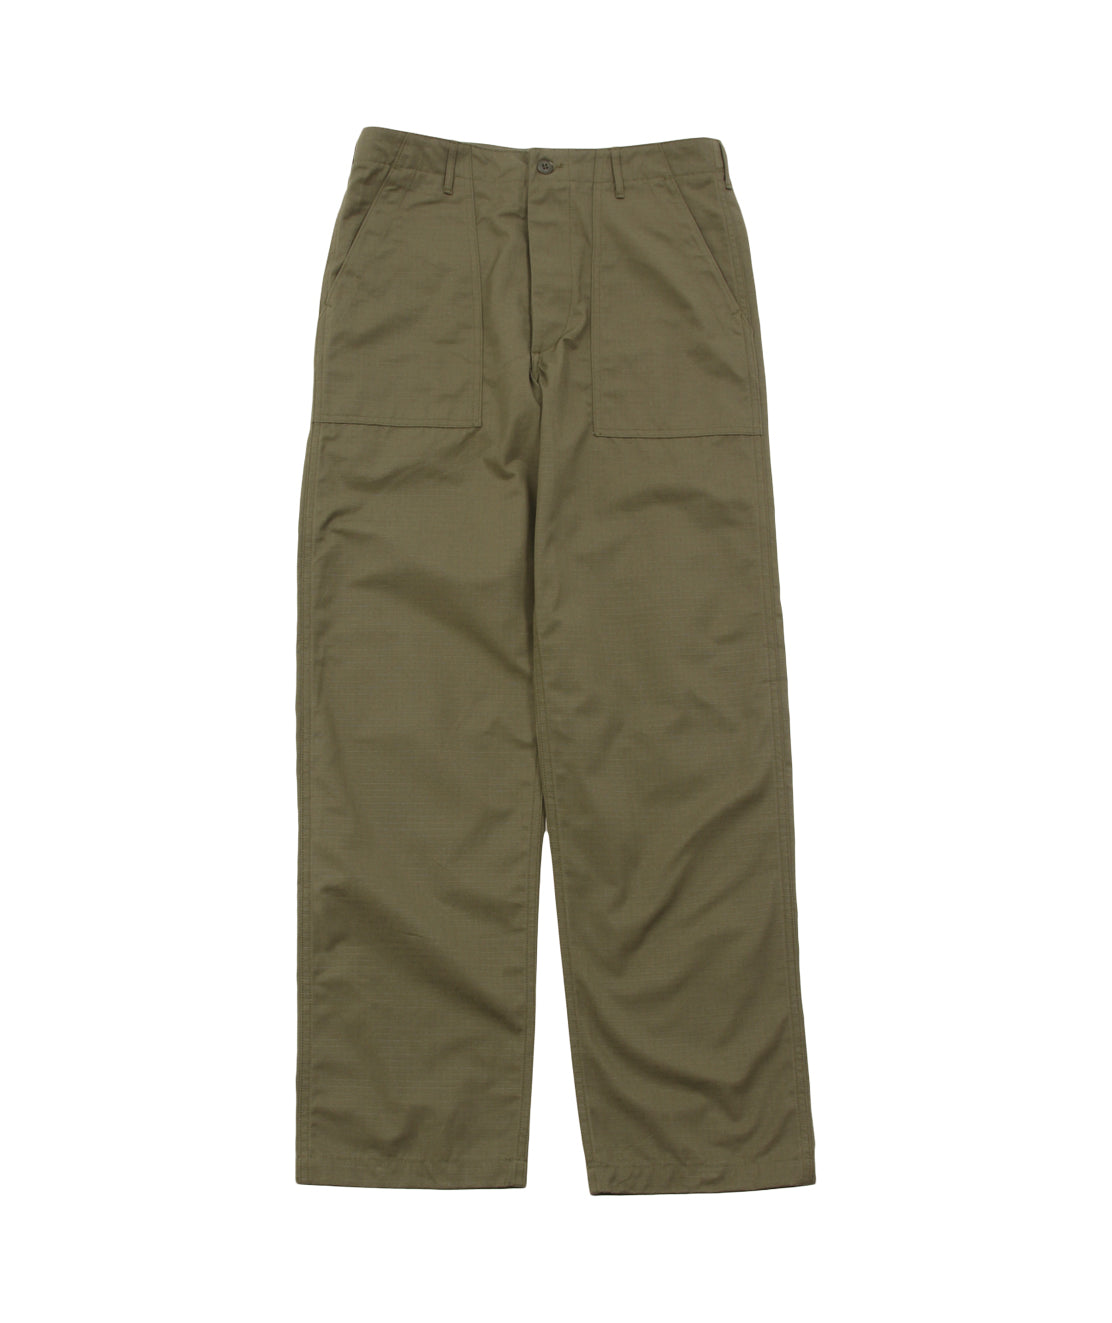 Orslow US Army Fatigue Pant Rip Stop | Shop at Copperfield